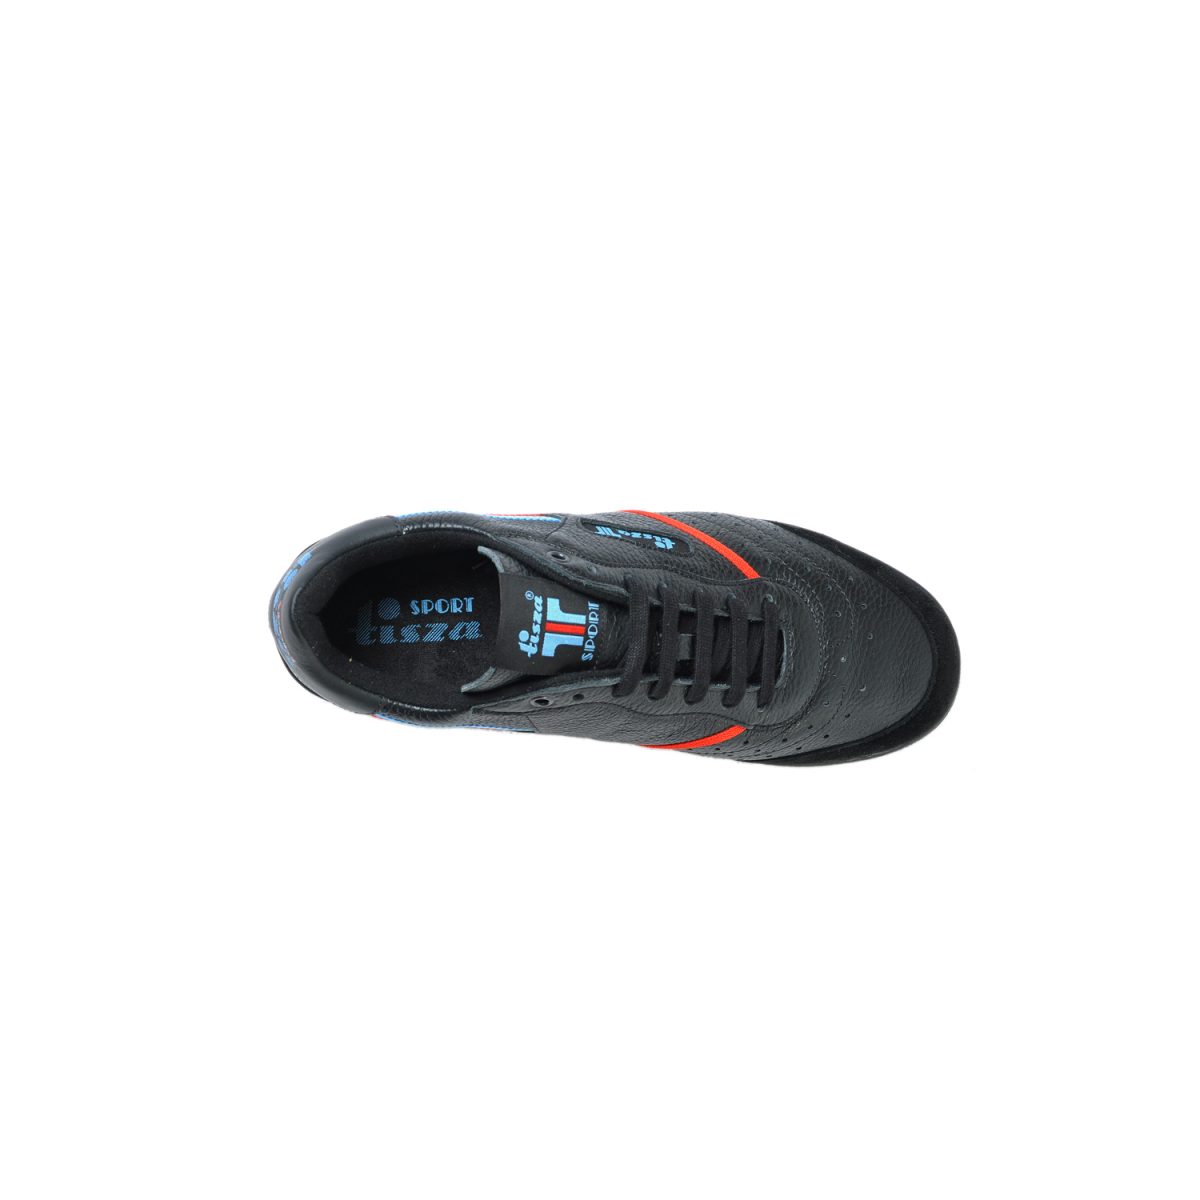 Tisza shoes - Sport - Black-red